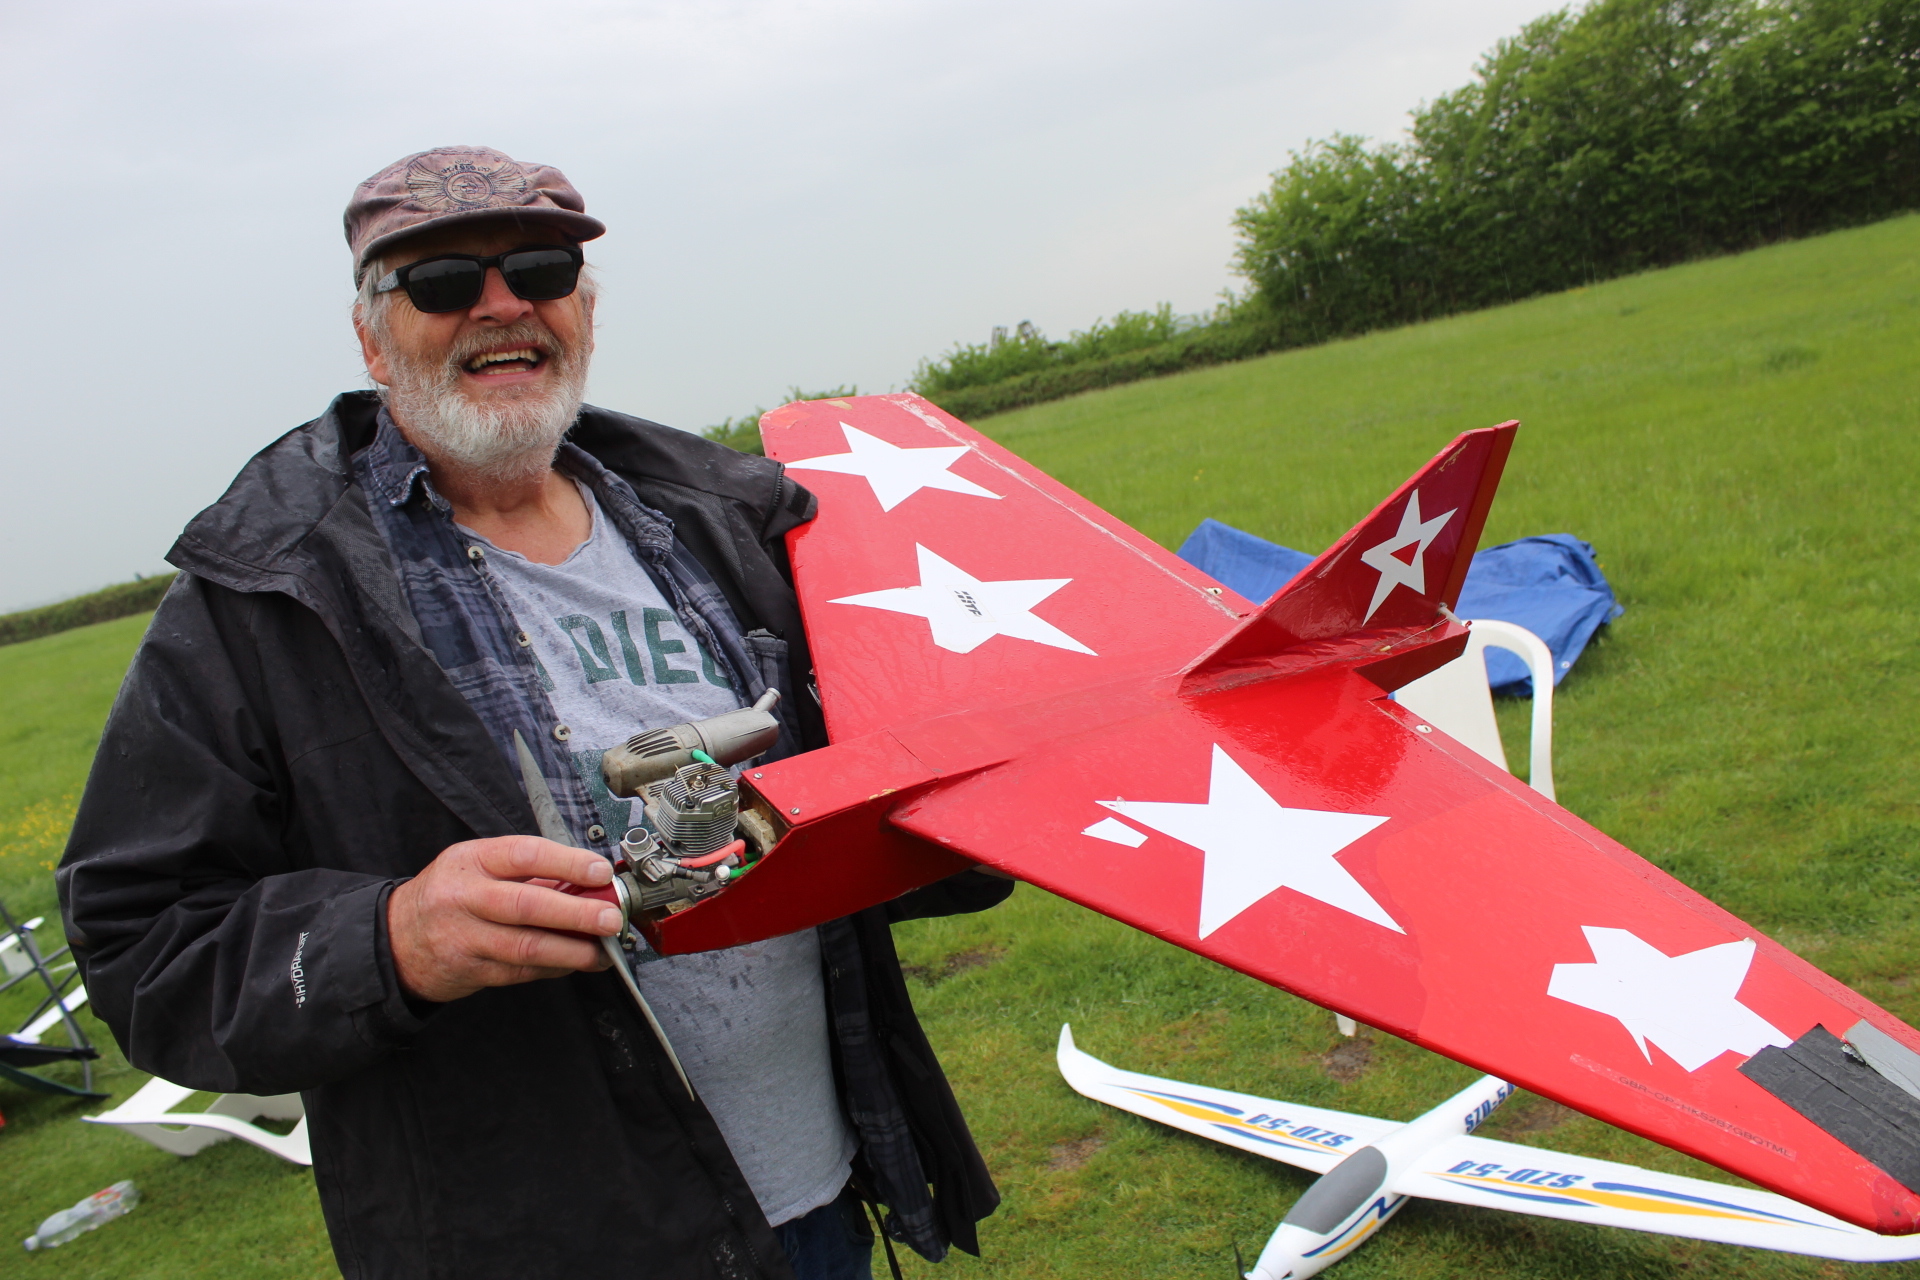 North Berks Radio Model Aircraft Society takes part in the Guinness World Record attempt at their East Hanney airfield on Sunday, May 15 Pictured: Chris Hunt